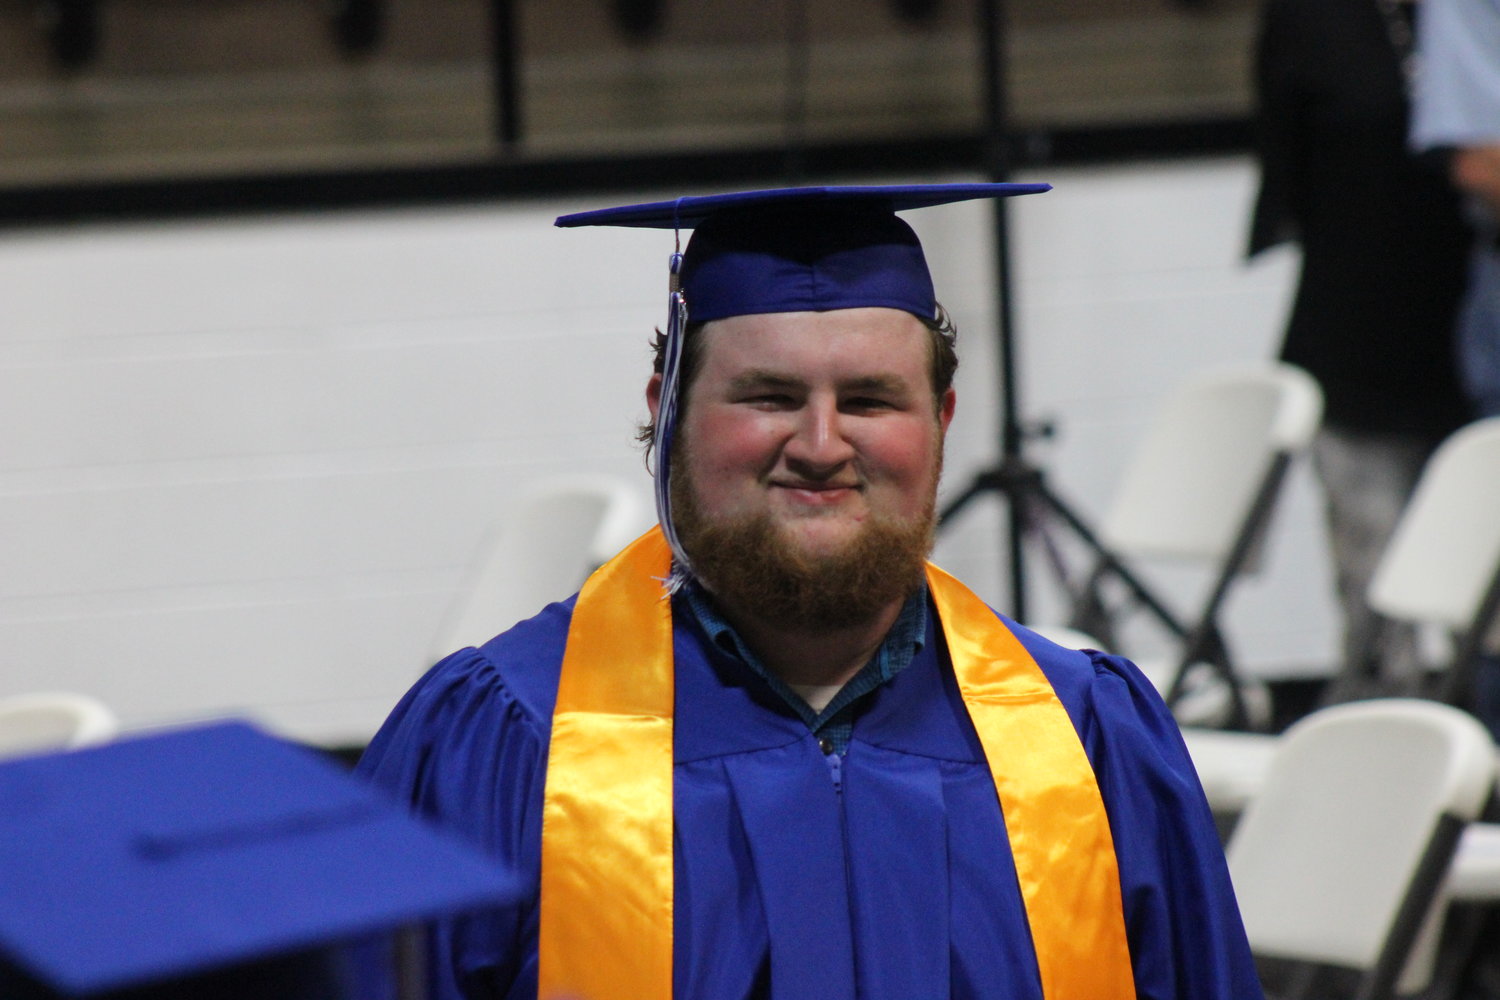 Hartville graduate Gavin Epperly with a big smile during the procession.